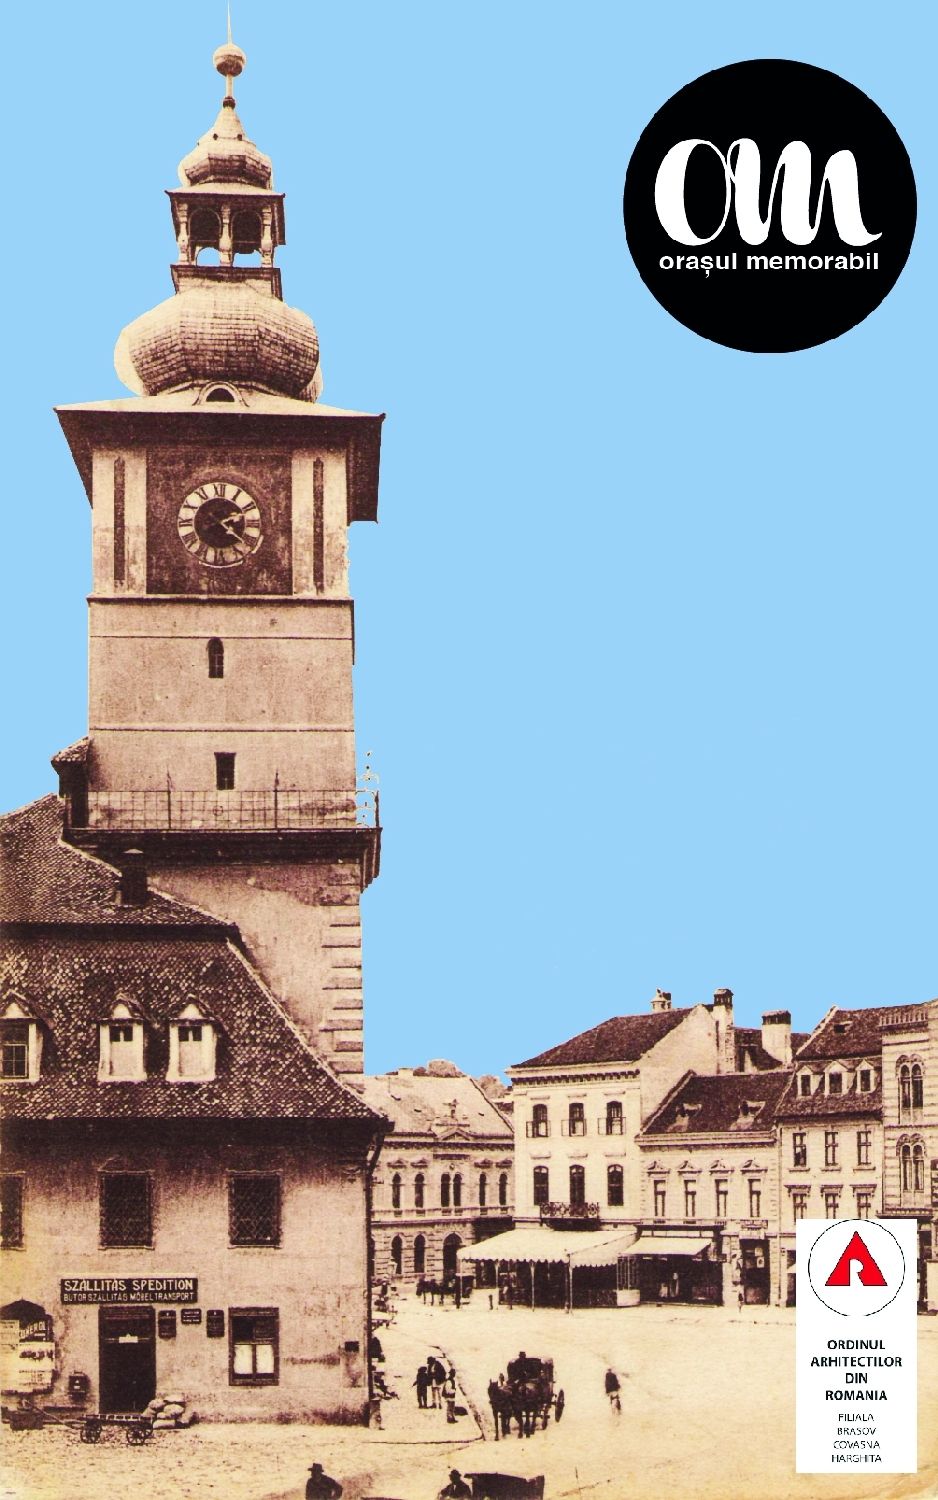 Poster of the Oraşul Memorabil project displaying the old town hall of Braşov